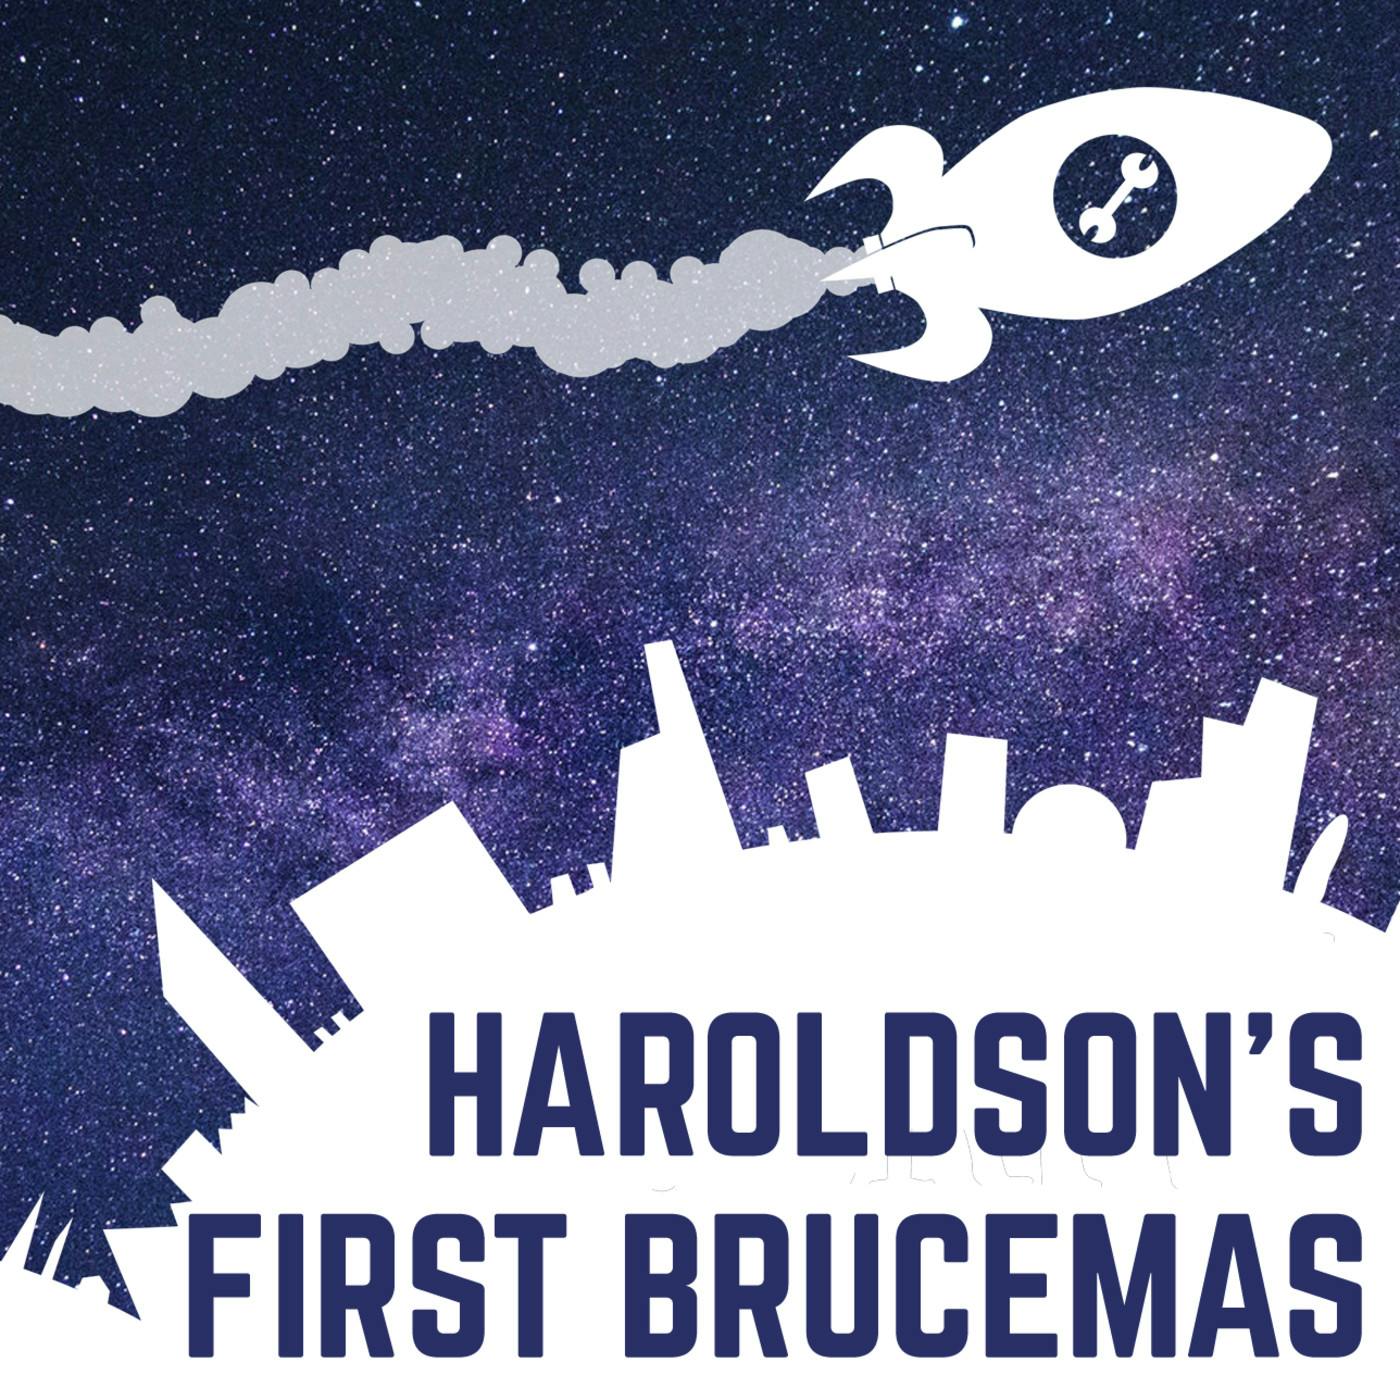 Haroldson's First Brucemas